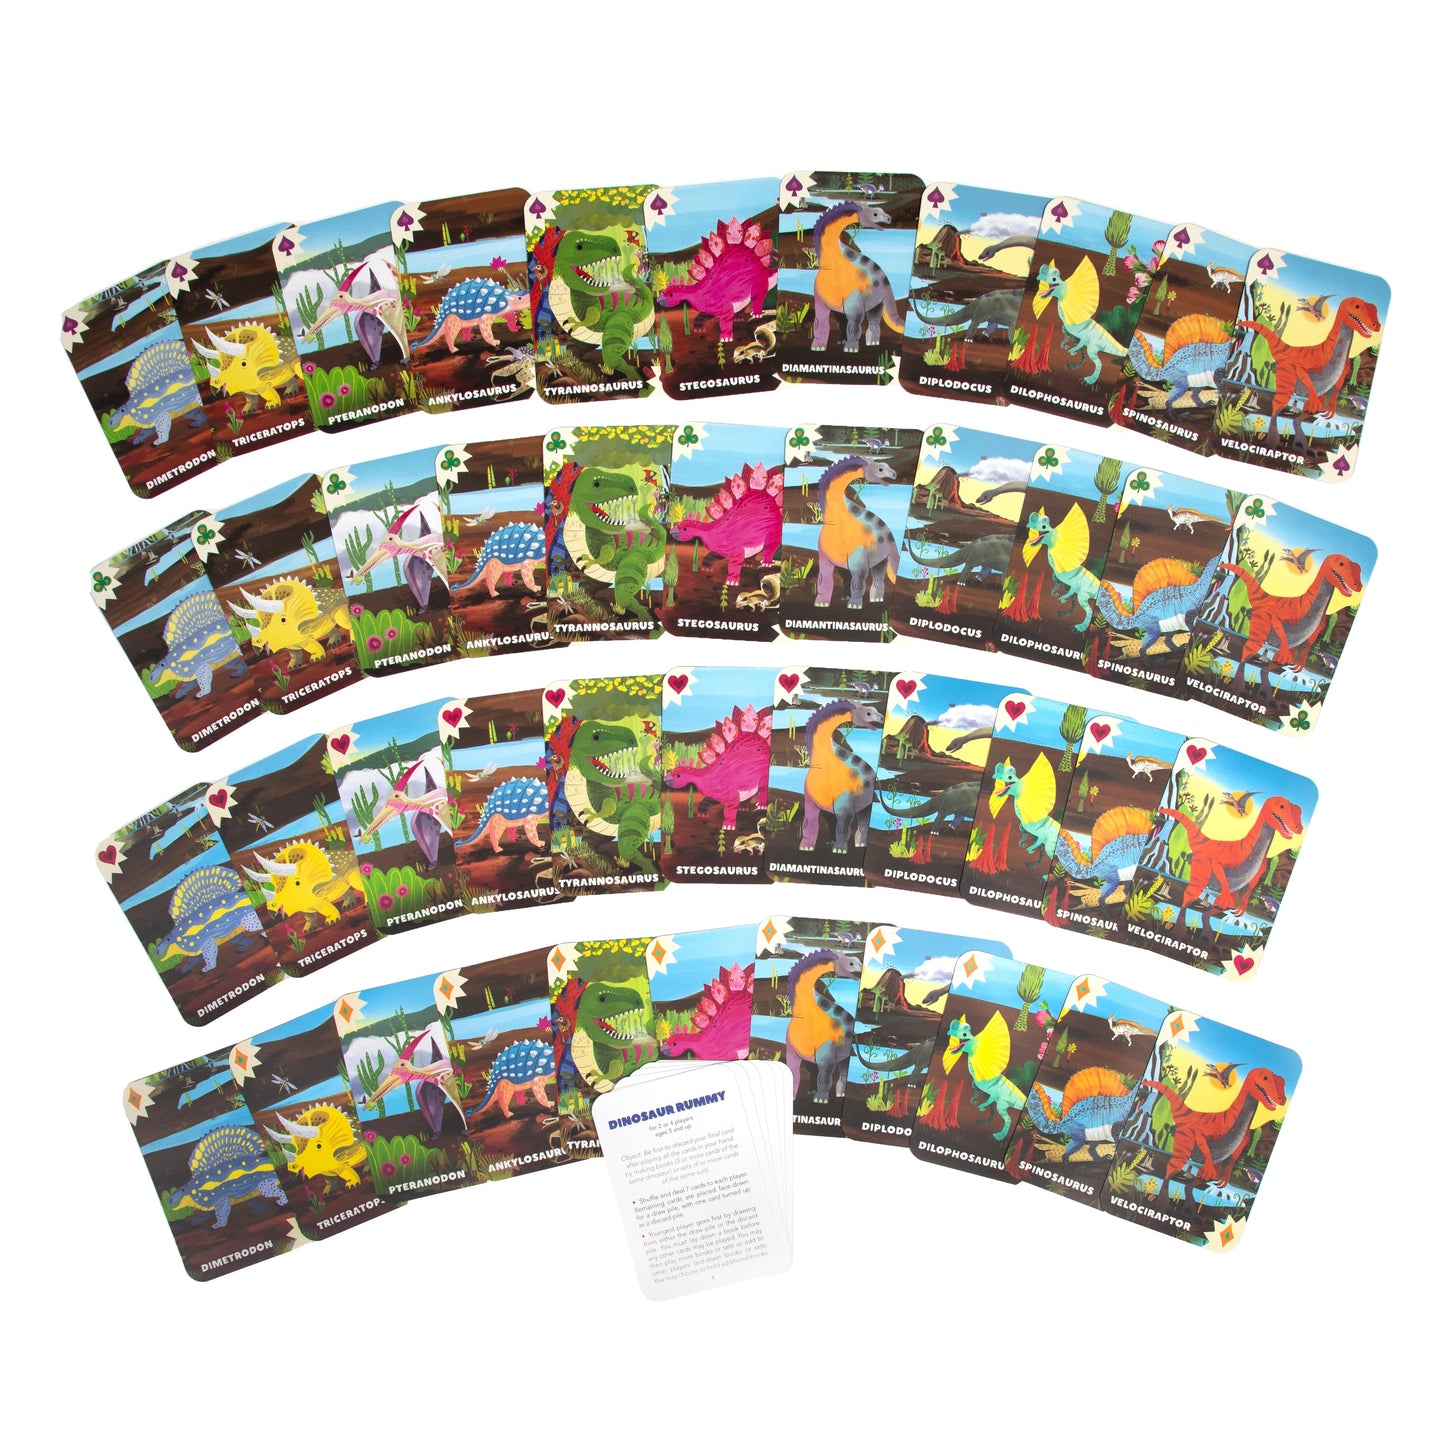 Dinosaur Rummy Playing Cards | Unique Fun Gifts for Kids Ages 5+